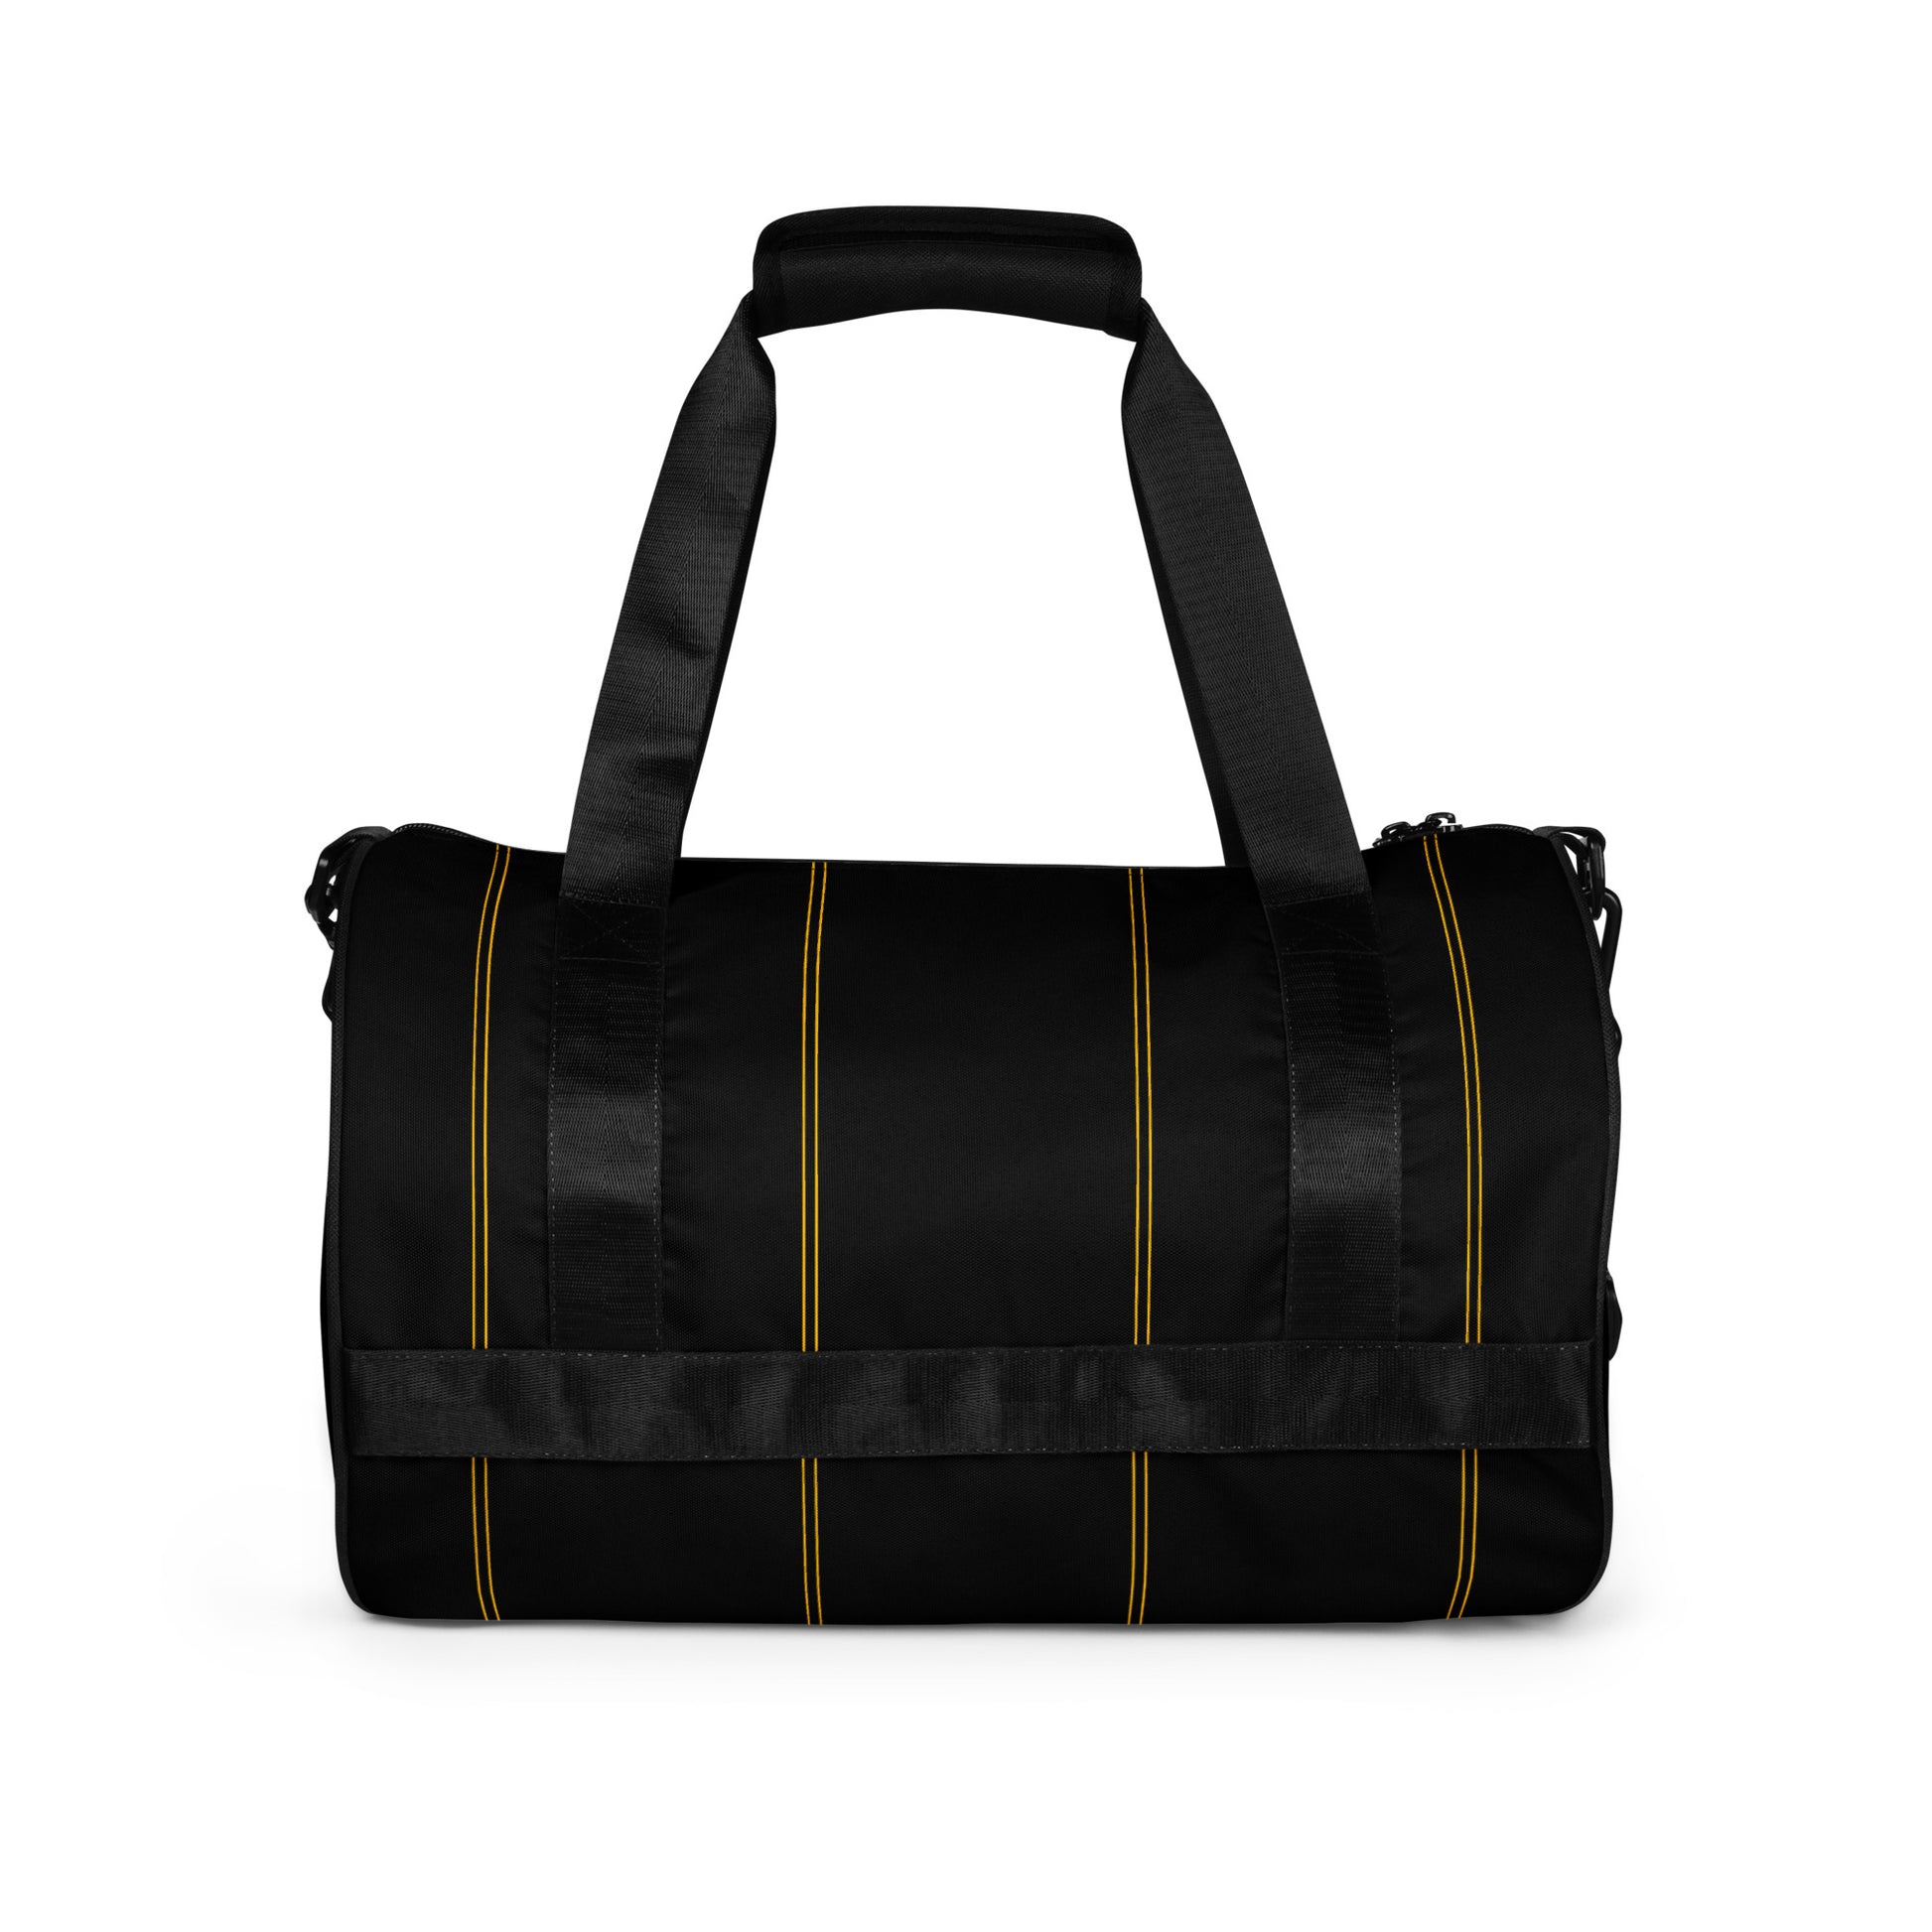 Club Amber Kilkenny Gym Bag - Designed by Moon Behind The Hill Available to Buy at a Discounted Price on Moon Behind The Hill Online Designer Discount Store